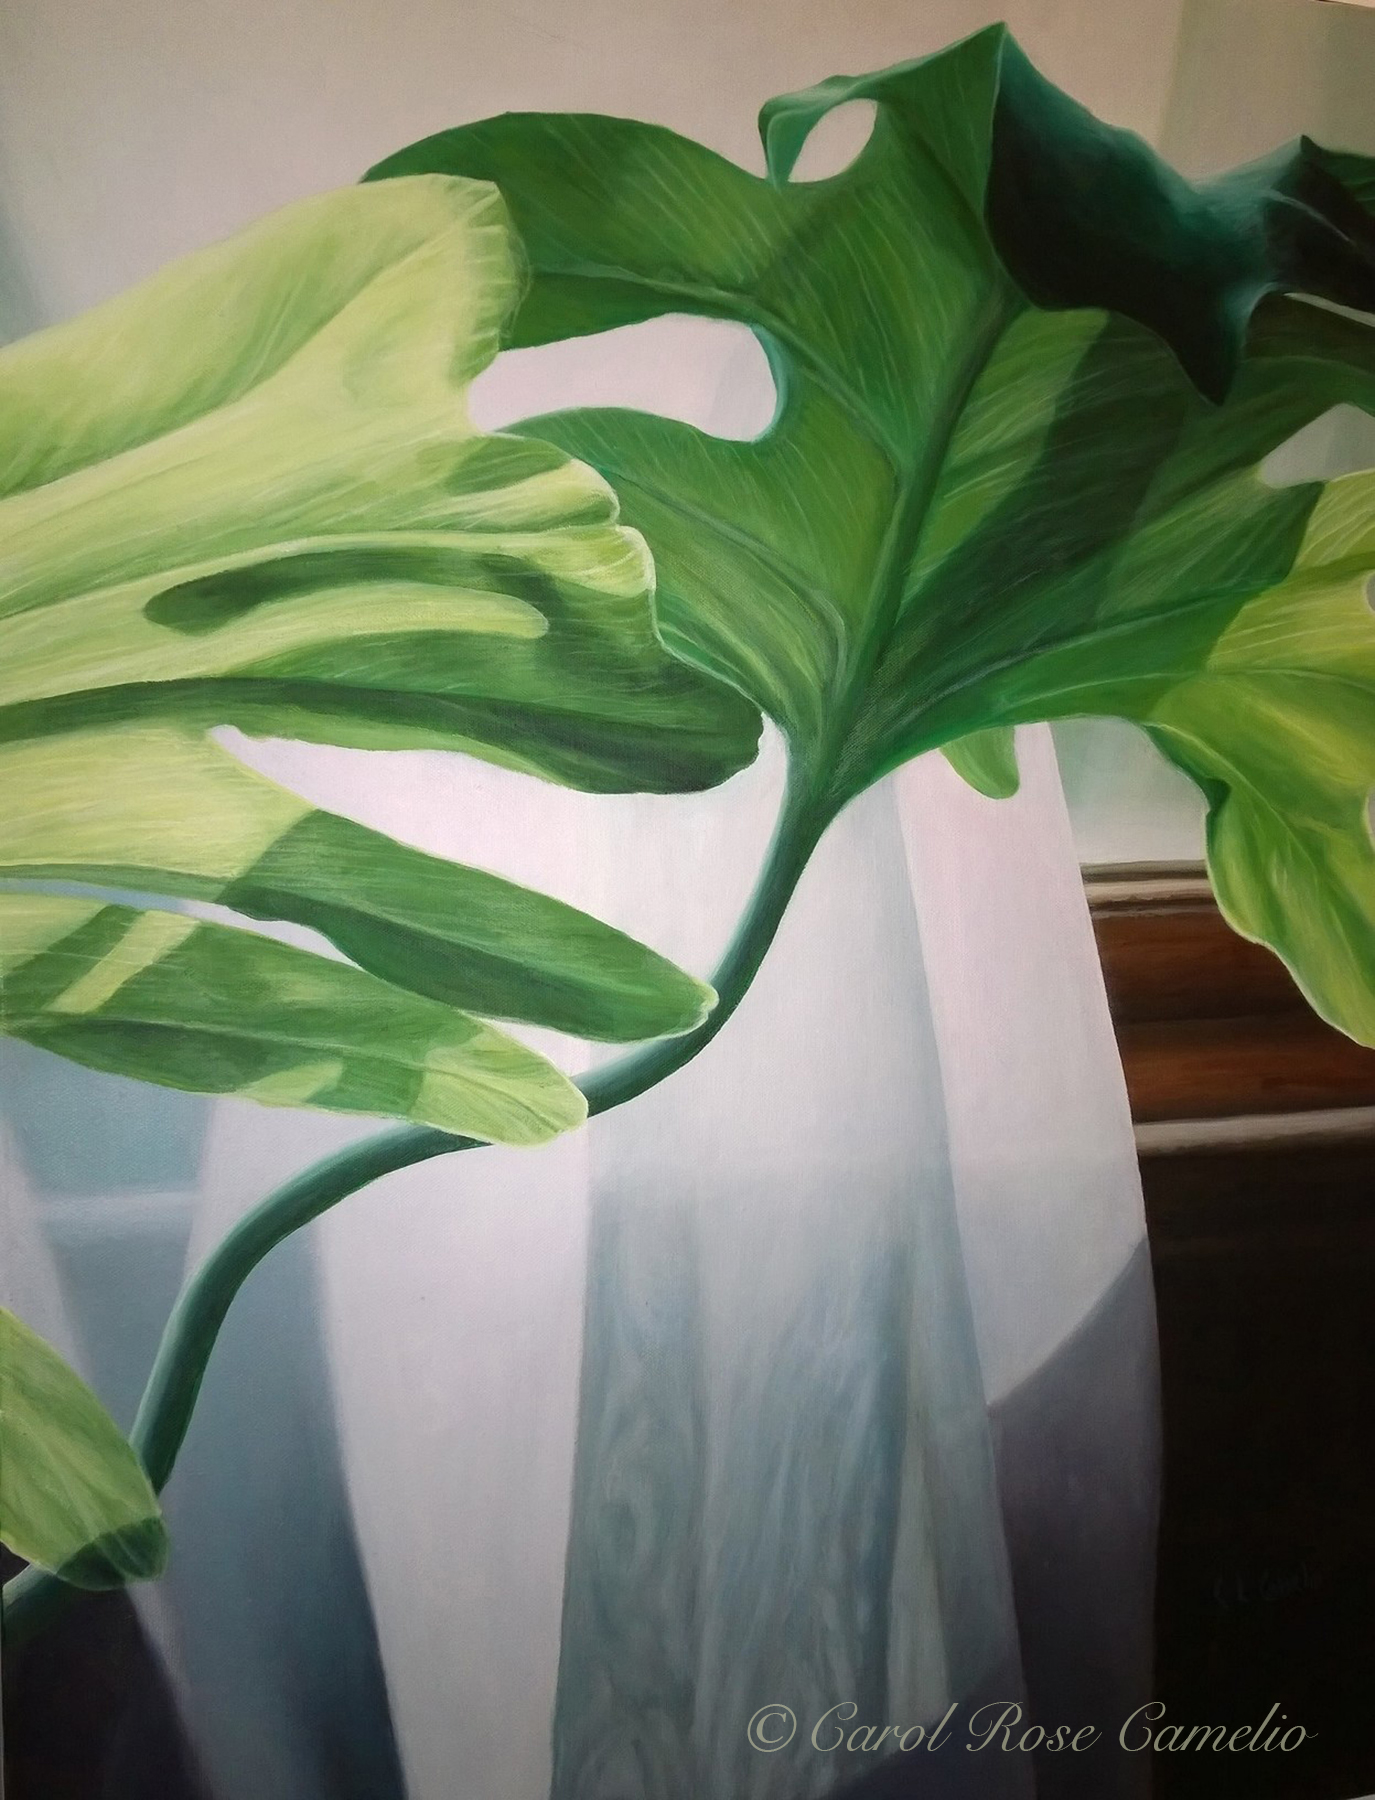 By the Window: Sunlight shines through sheer curtains, illuminating the leaves of a philodendron.